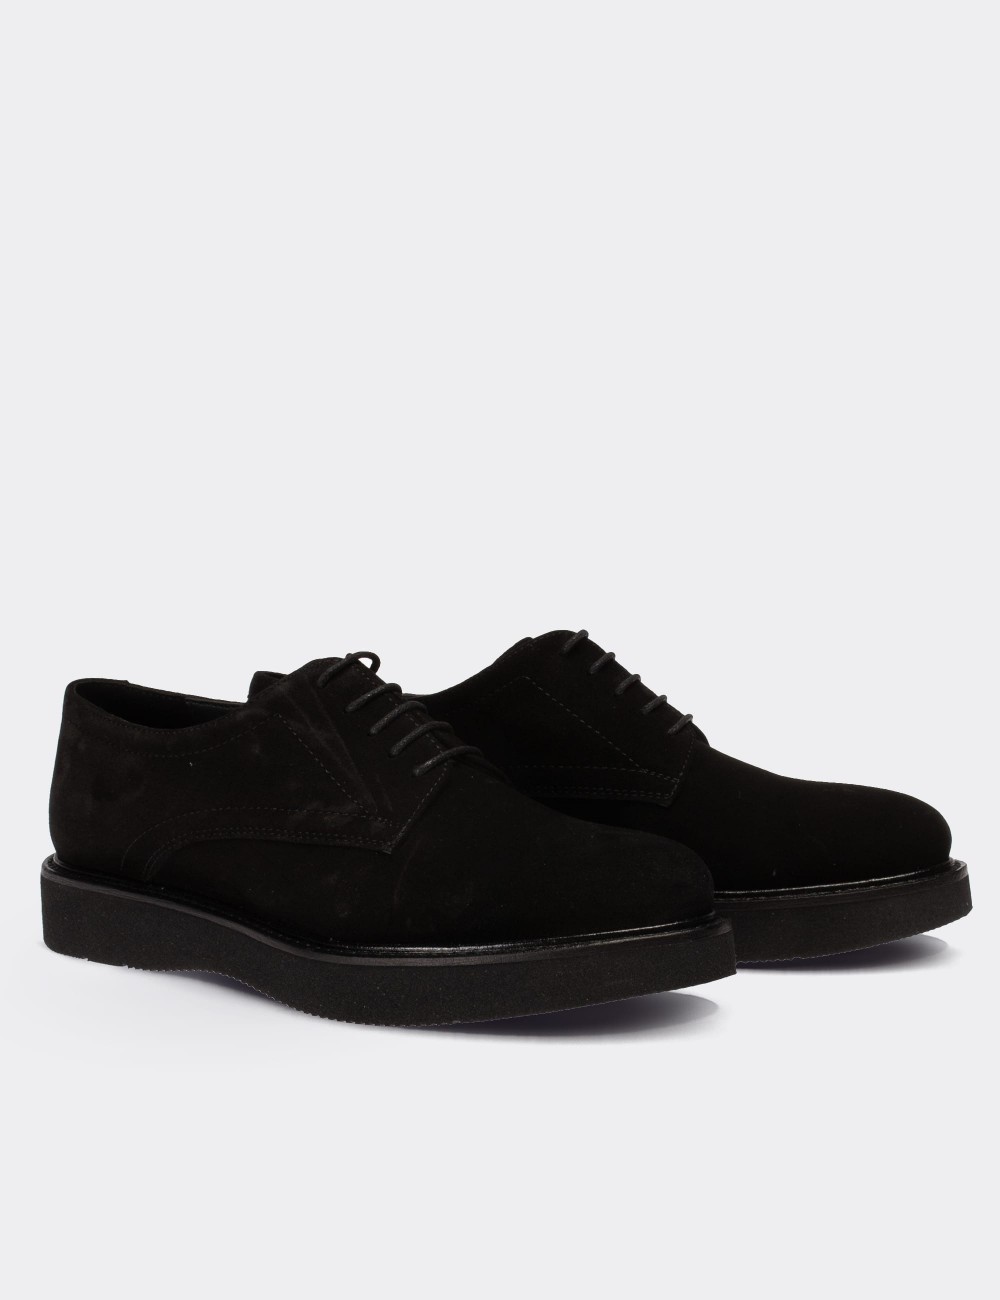 Black Suede Leather Lace-up Shoes - 01430ZSYHE13